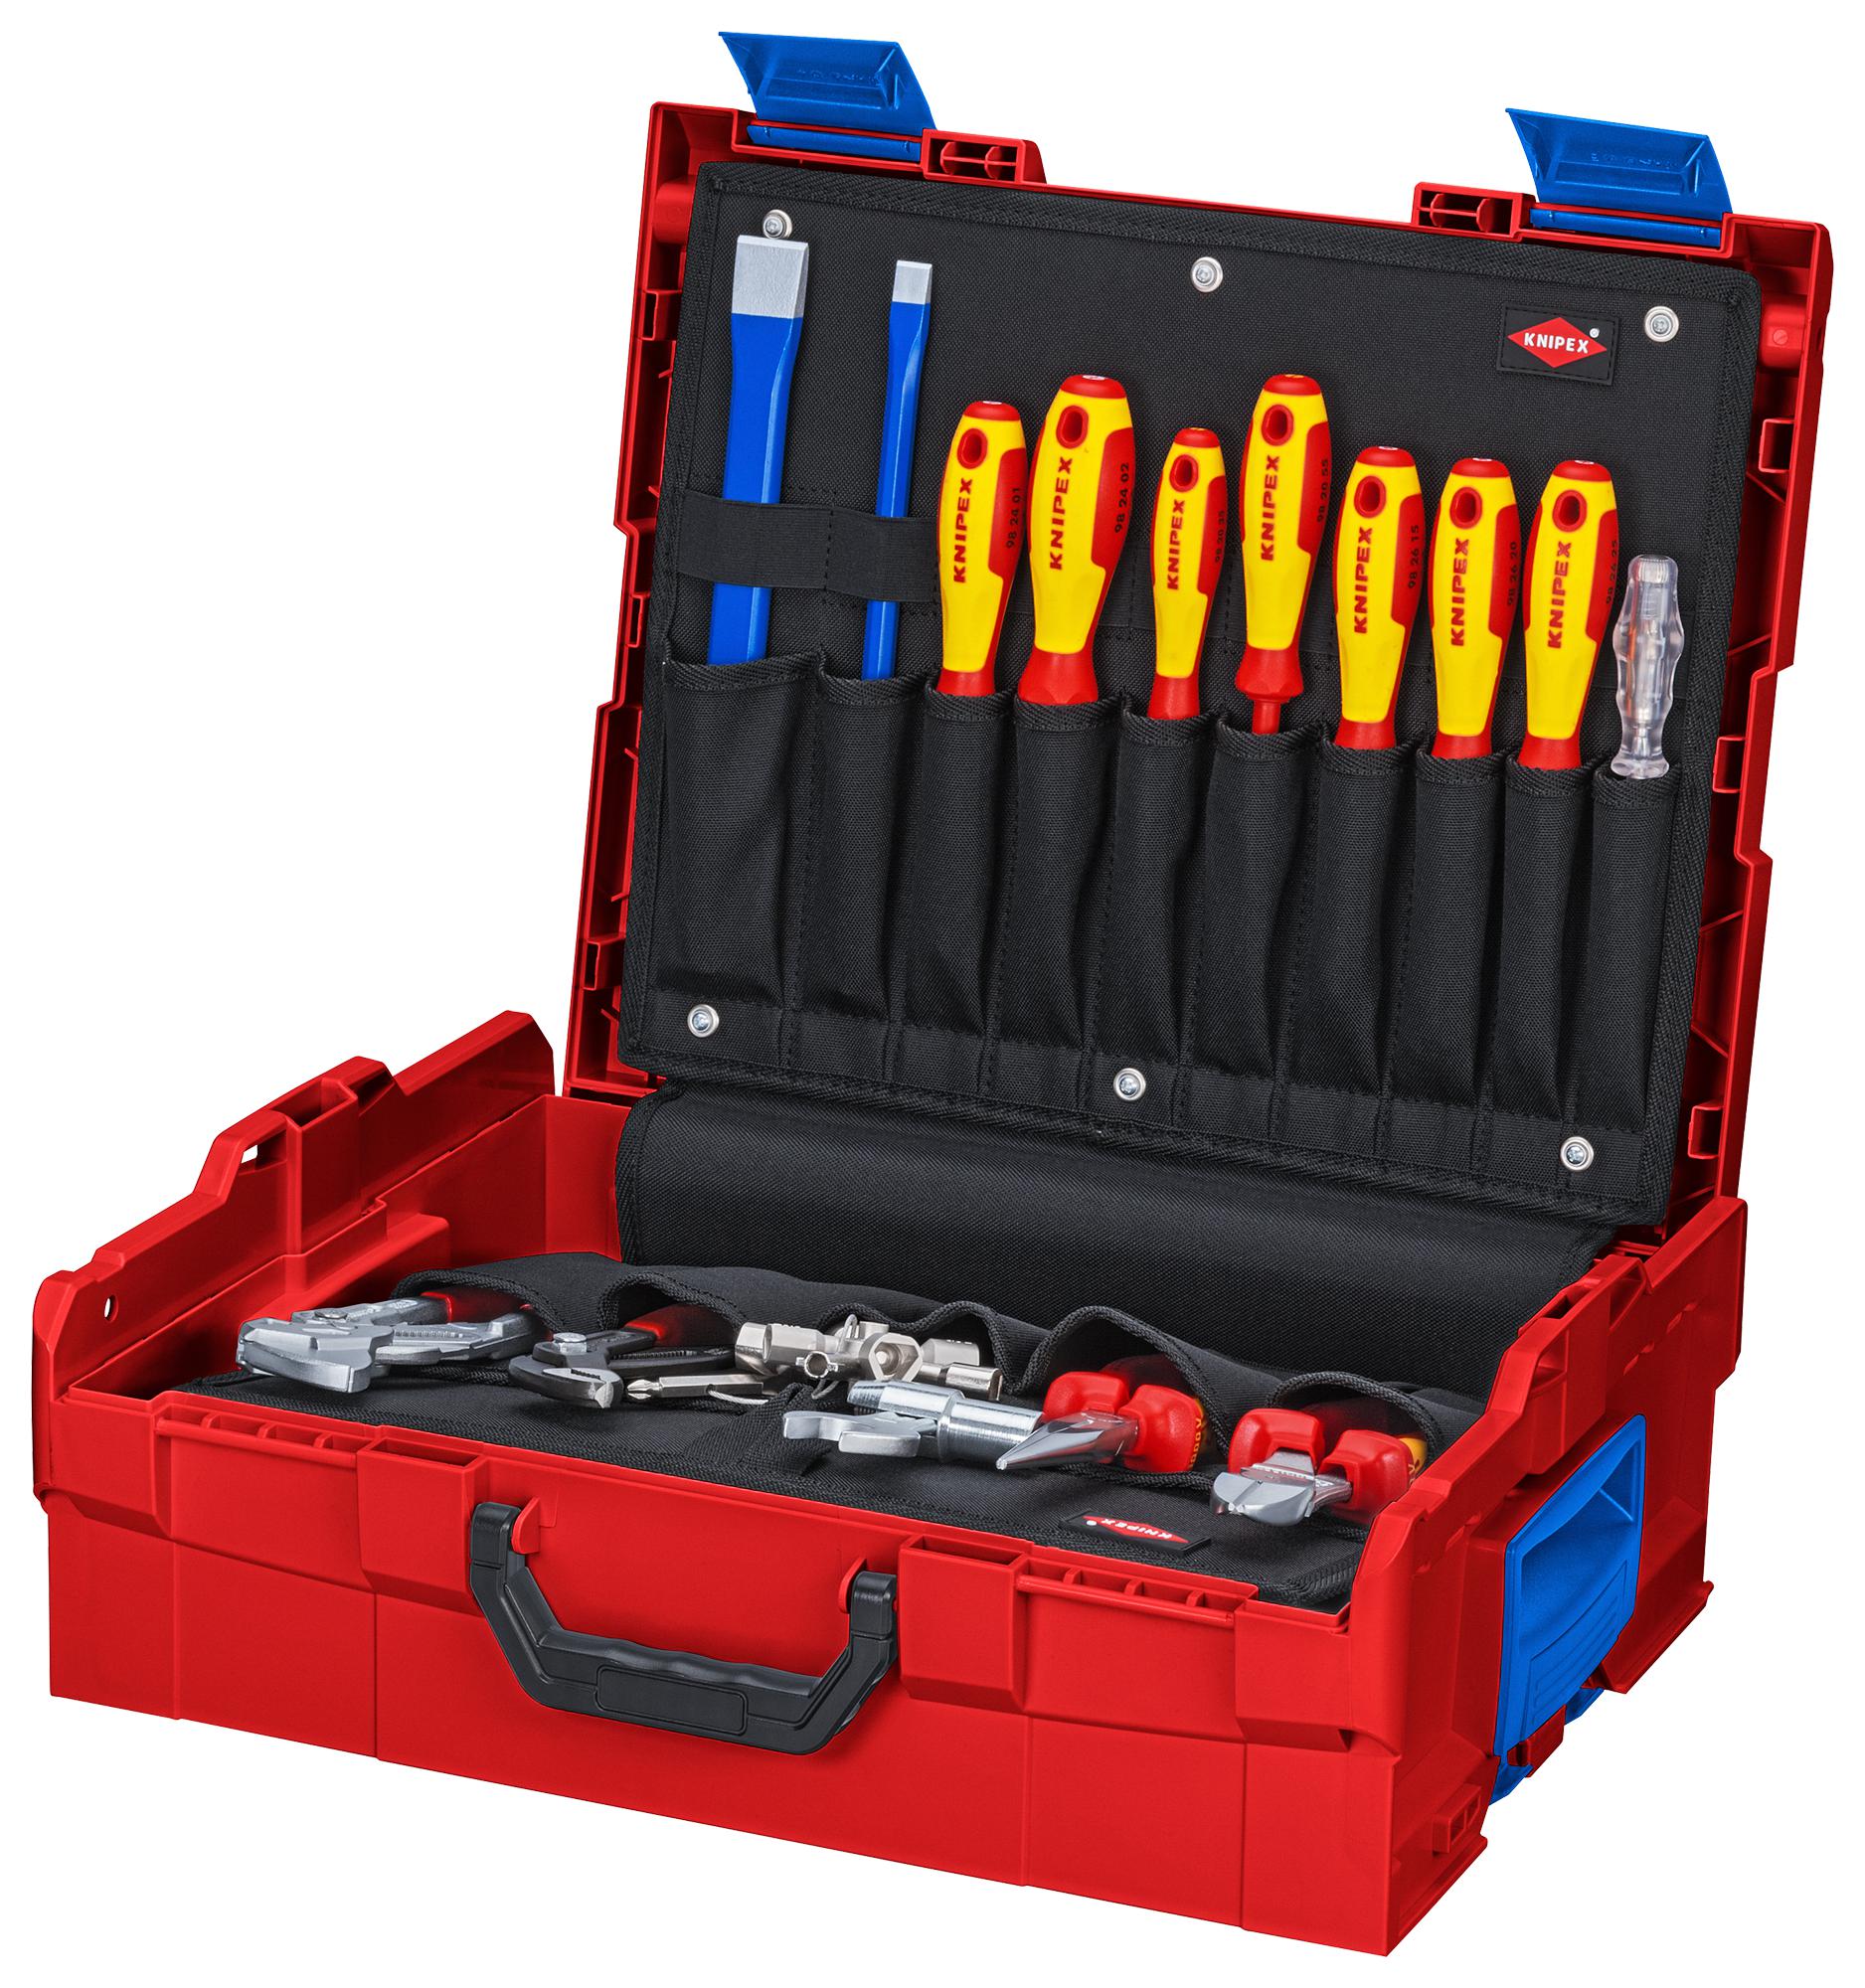 00 21 19 LB S ELECTRICAL TOOL KIT, 52 PC KNIPEX